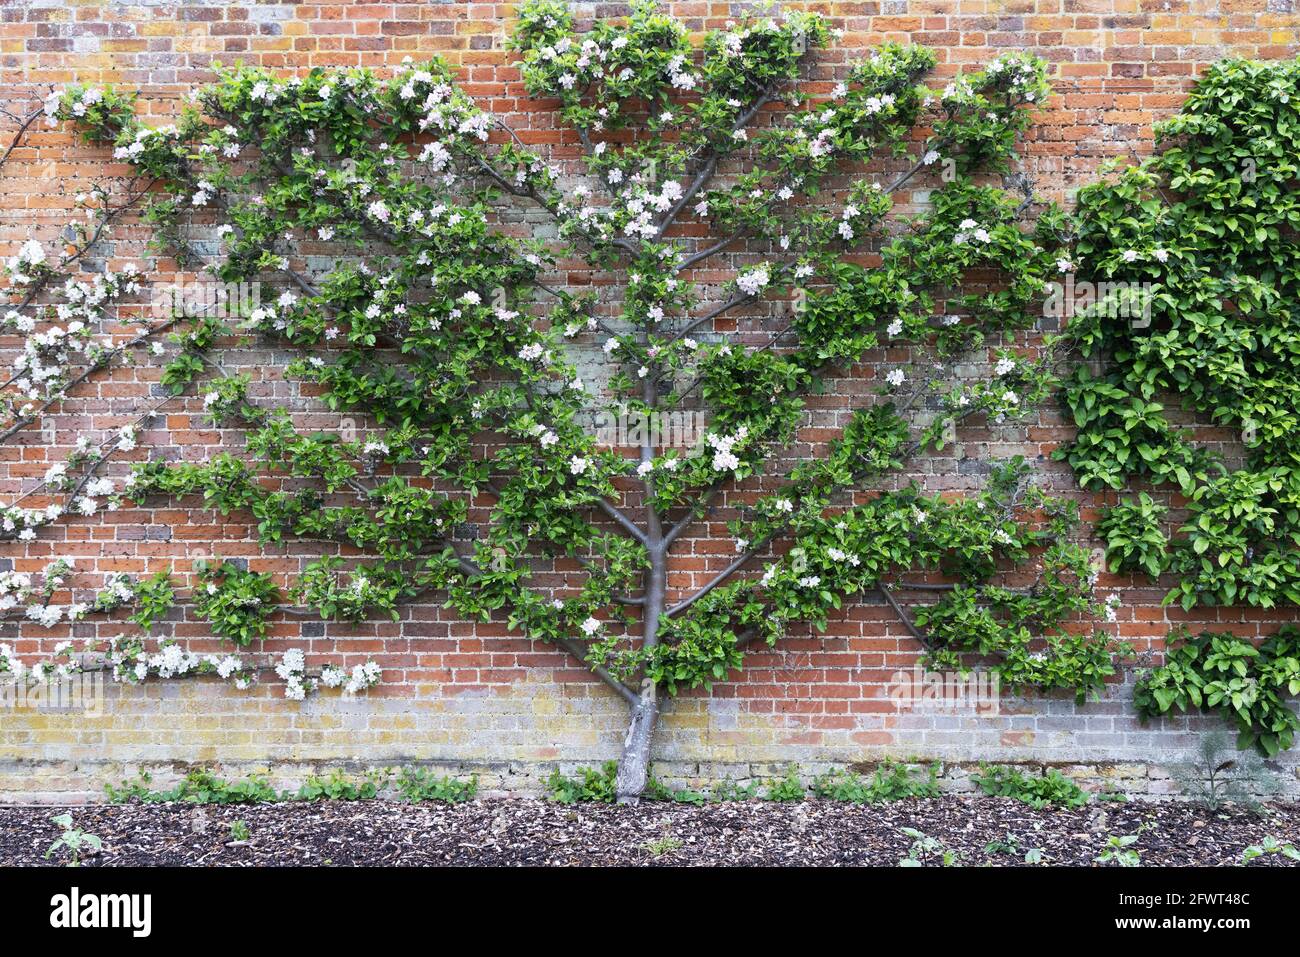 Apple tree fan grown or fanned on wires; Apple Edward VII variety growing against a wall in blossom in spring, Cambridgeshire UK Stock Photo